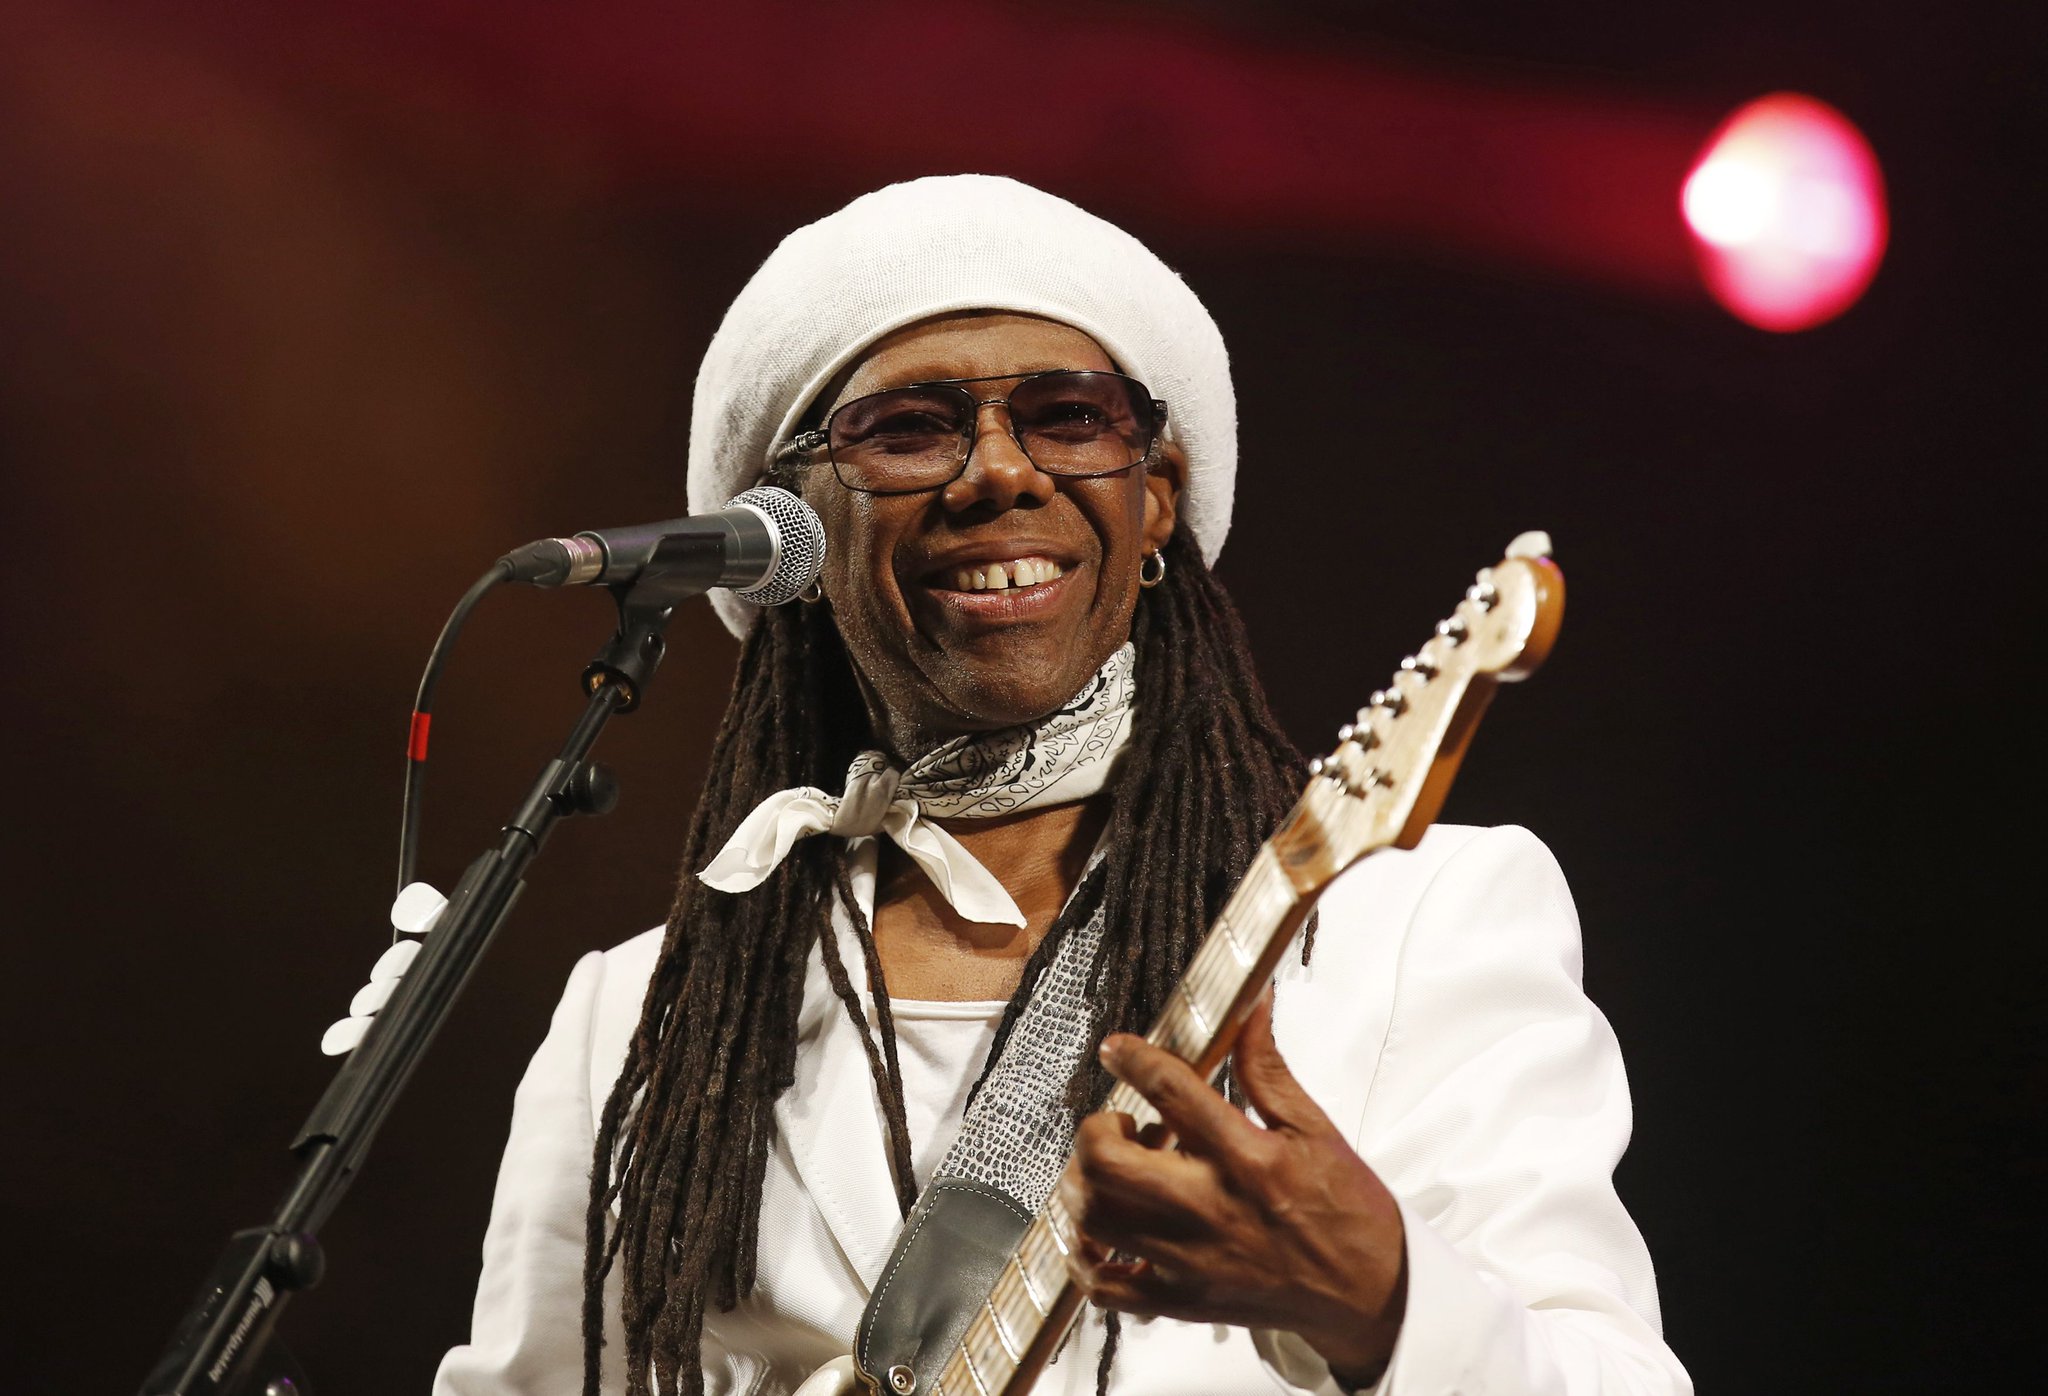 Happy 270th Mercurian Birthday Nile Rodgers!  Remessage 